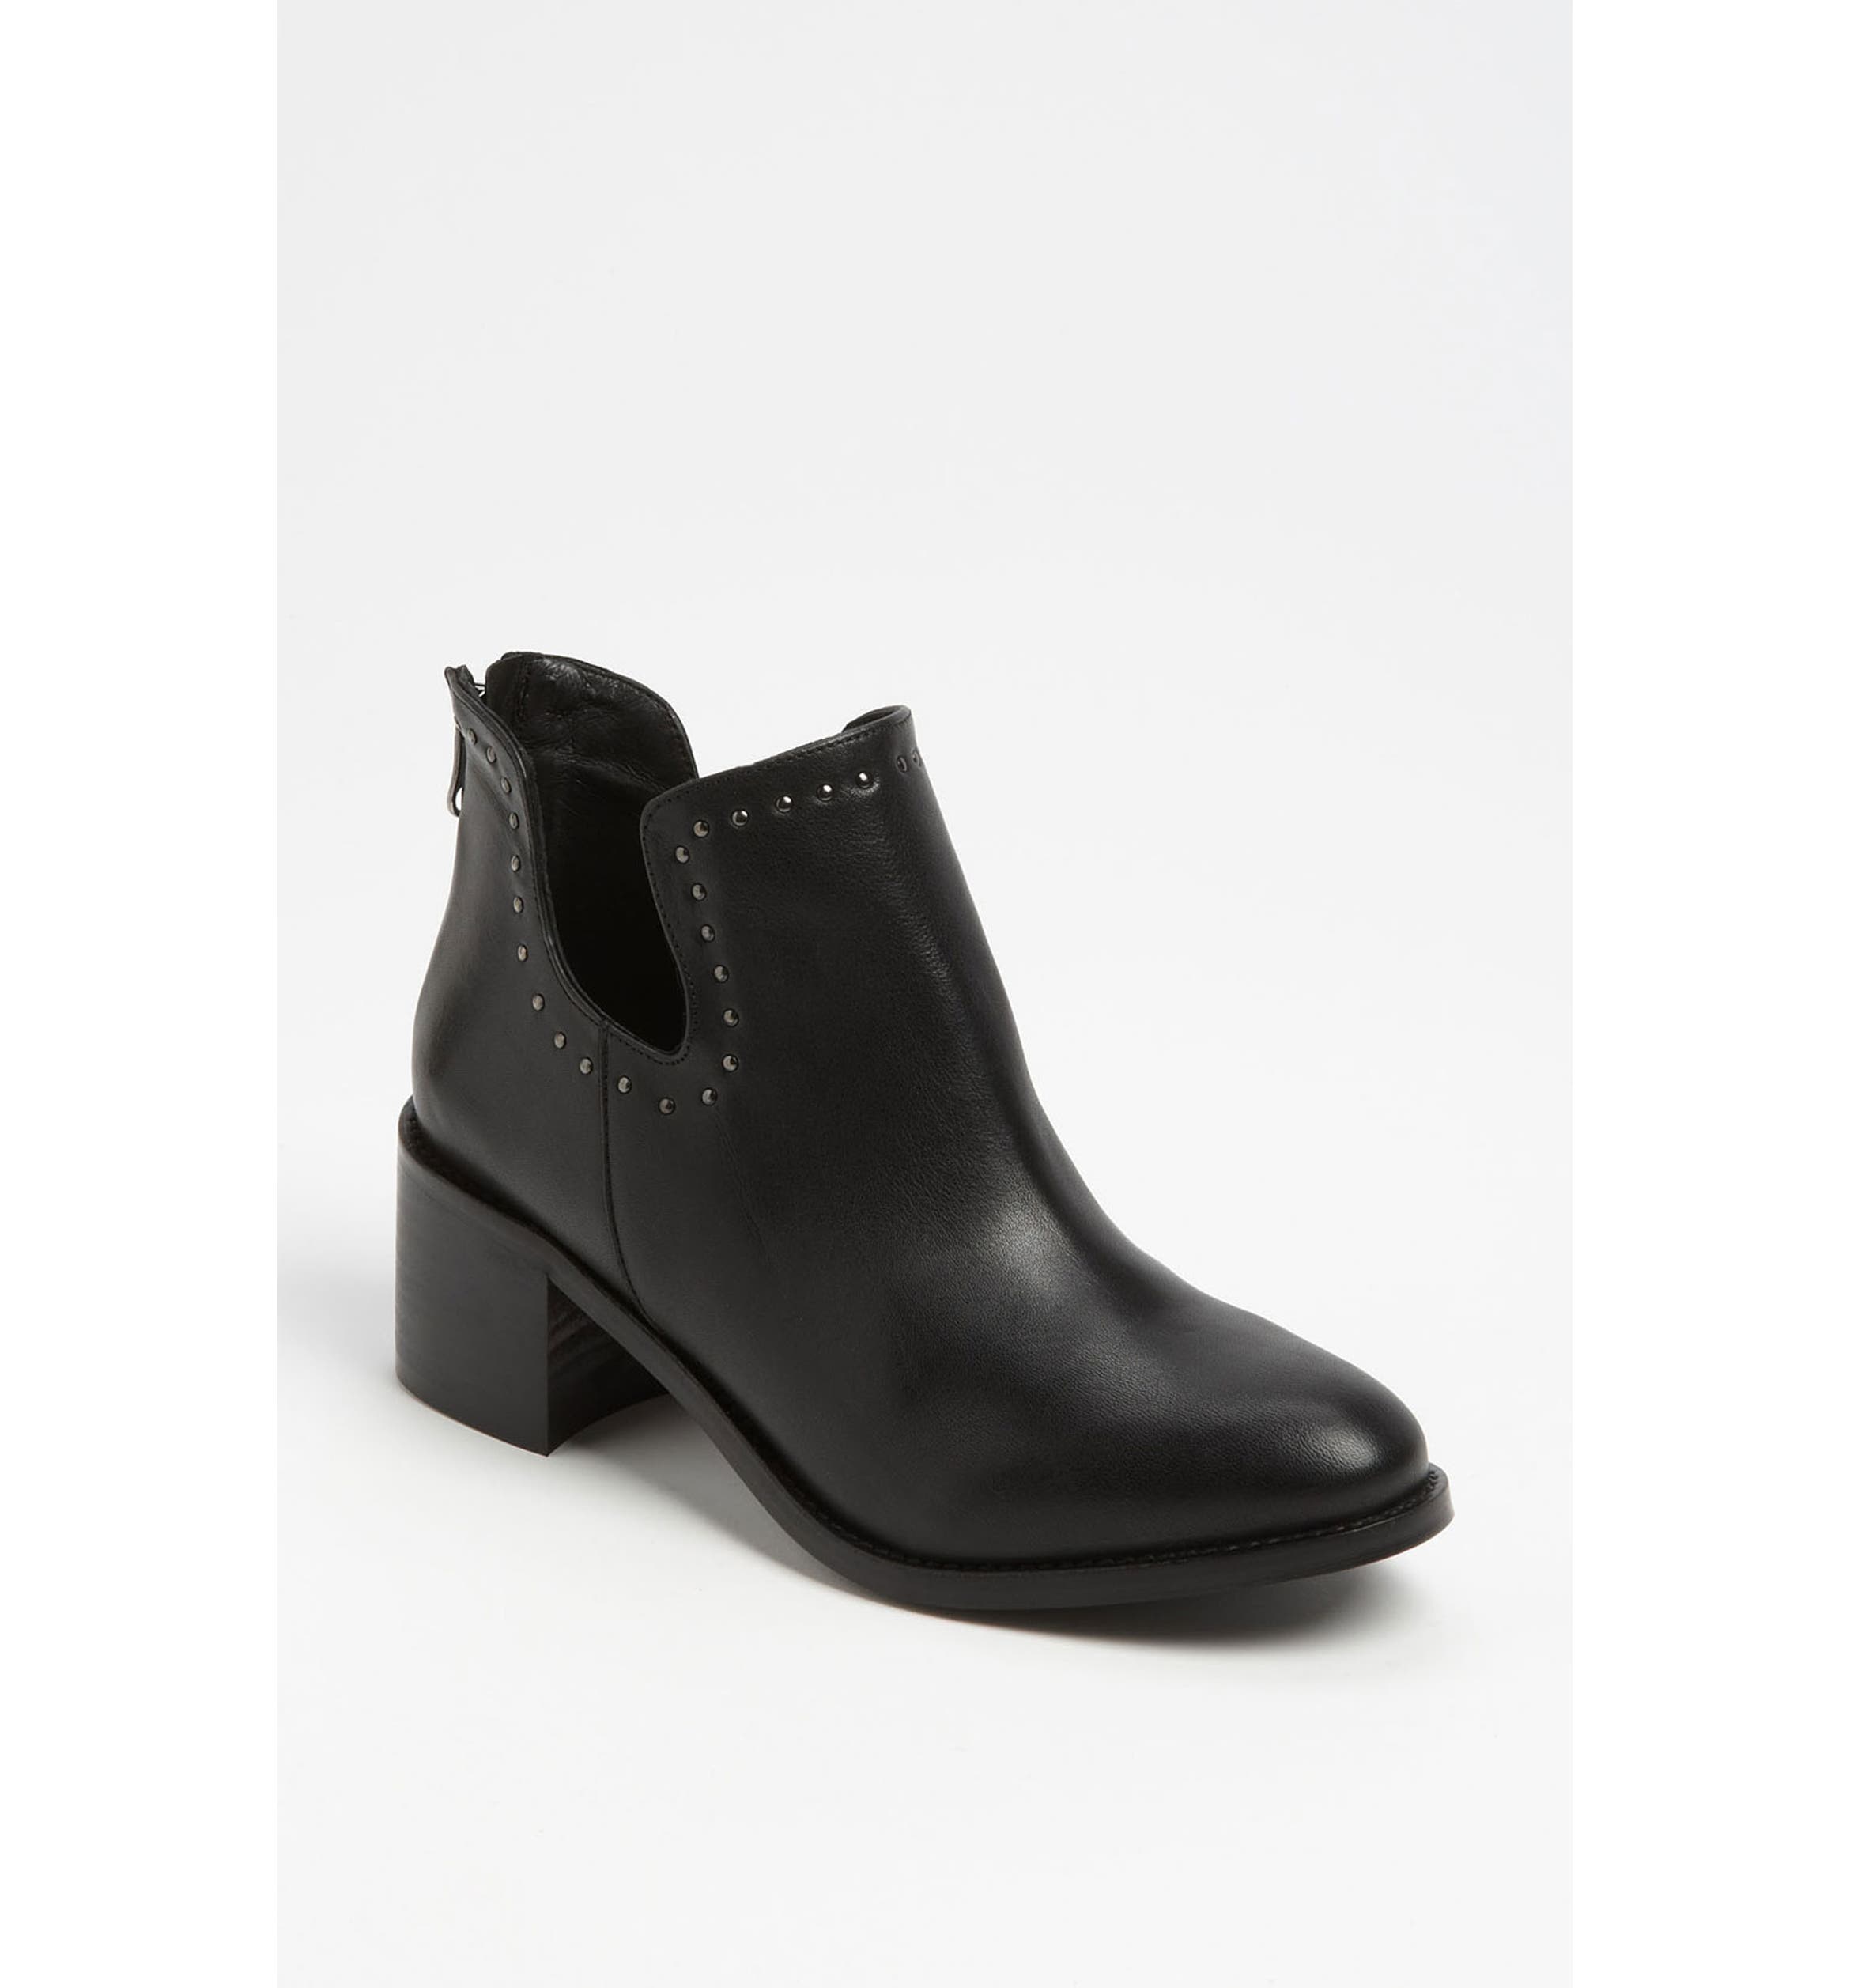 Topshop 'Accent' Boot | Nordstrom